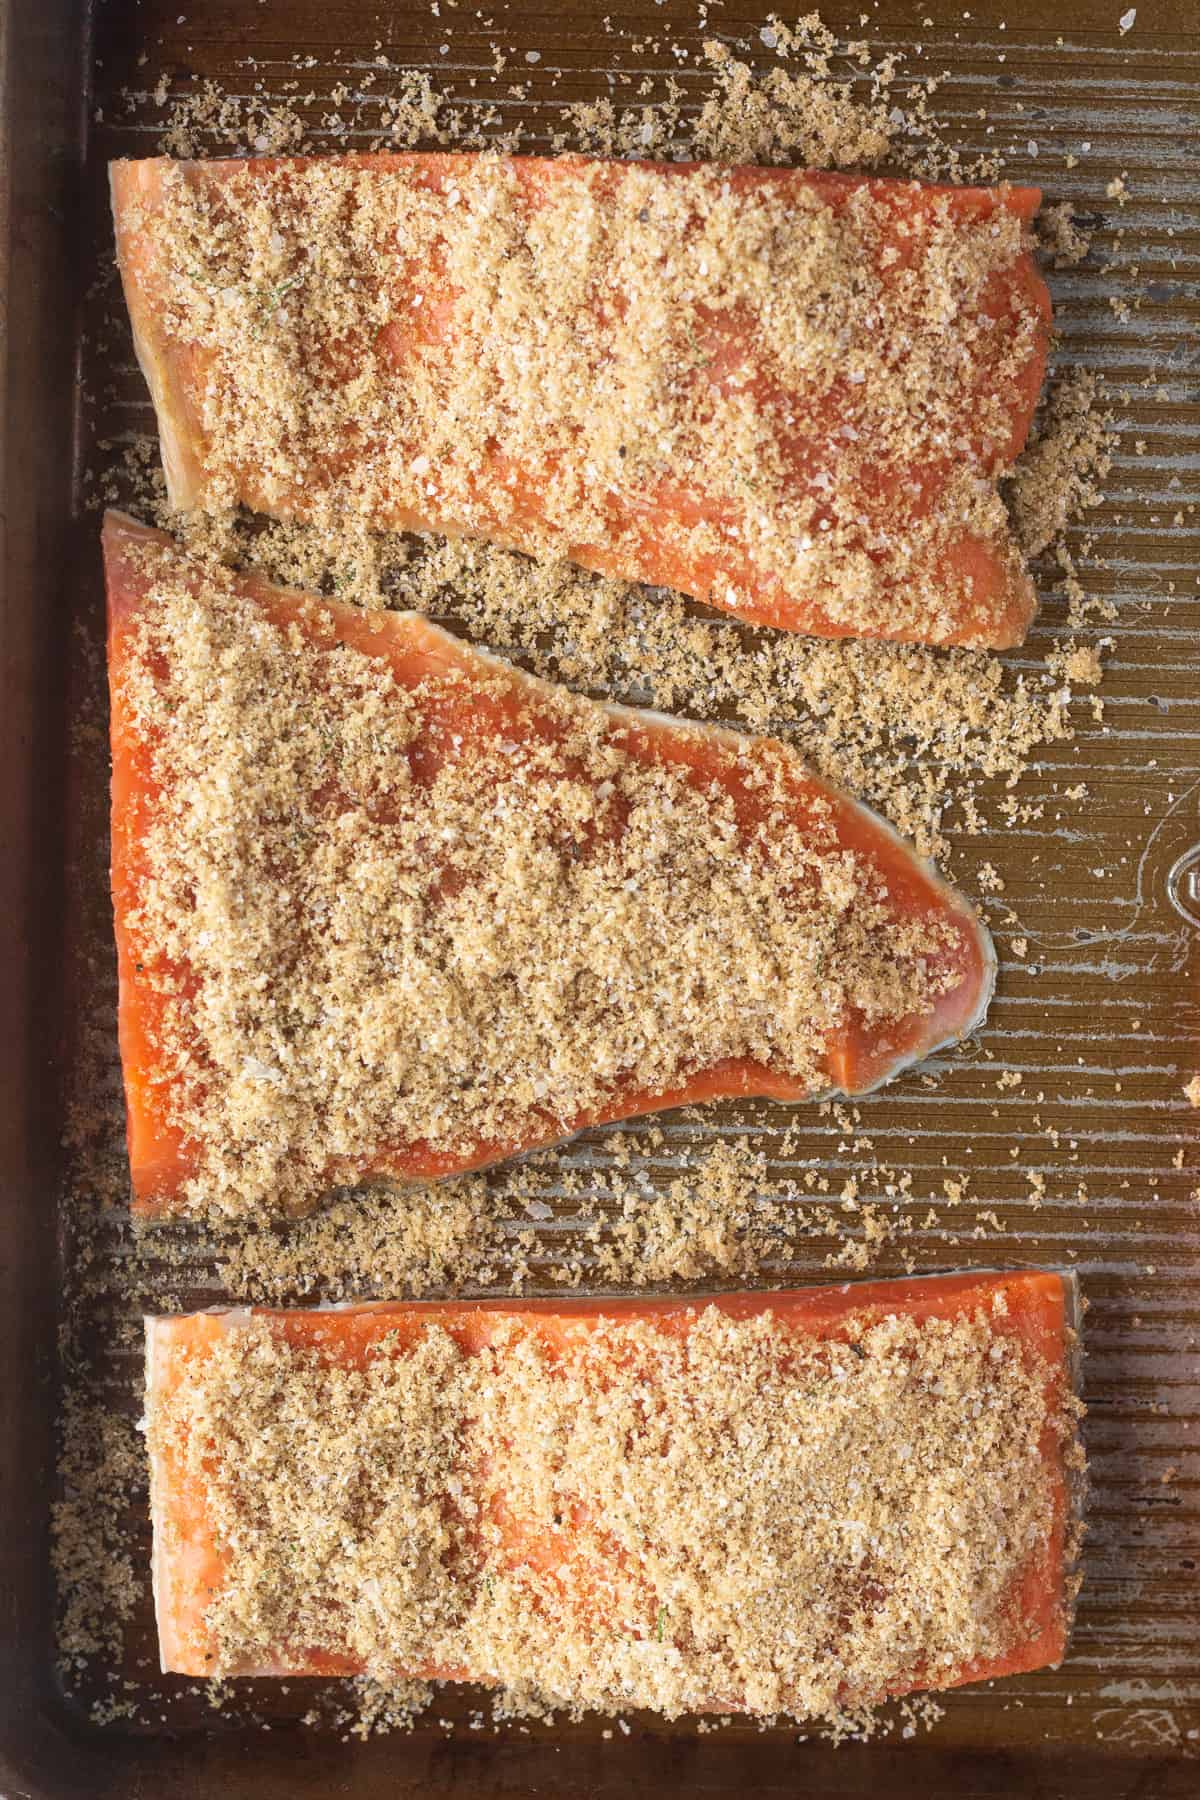 Top down shot of fresh salmon pieces on a wire rack covered with a sugar-salt brine